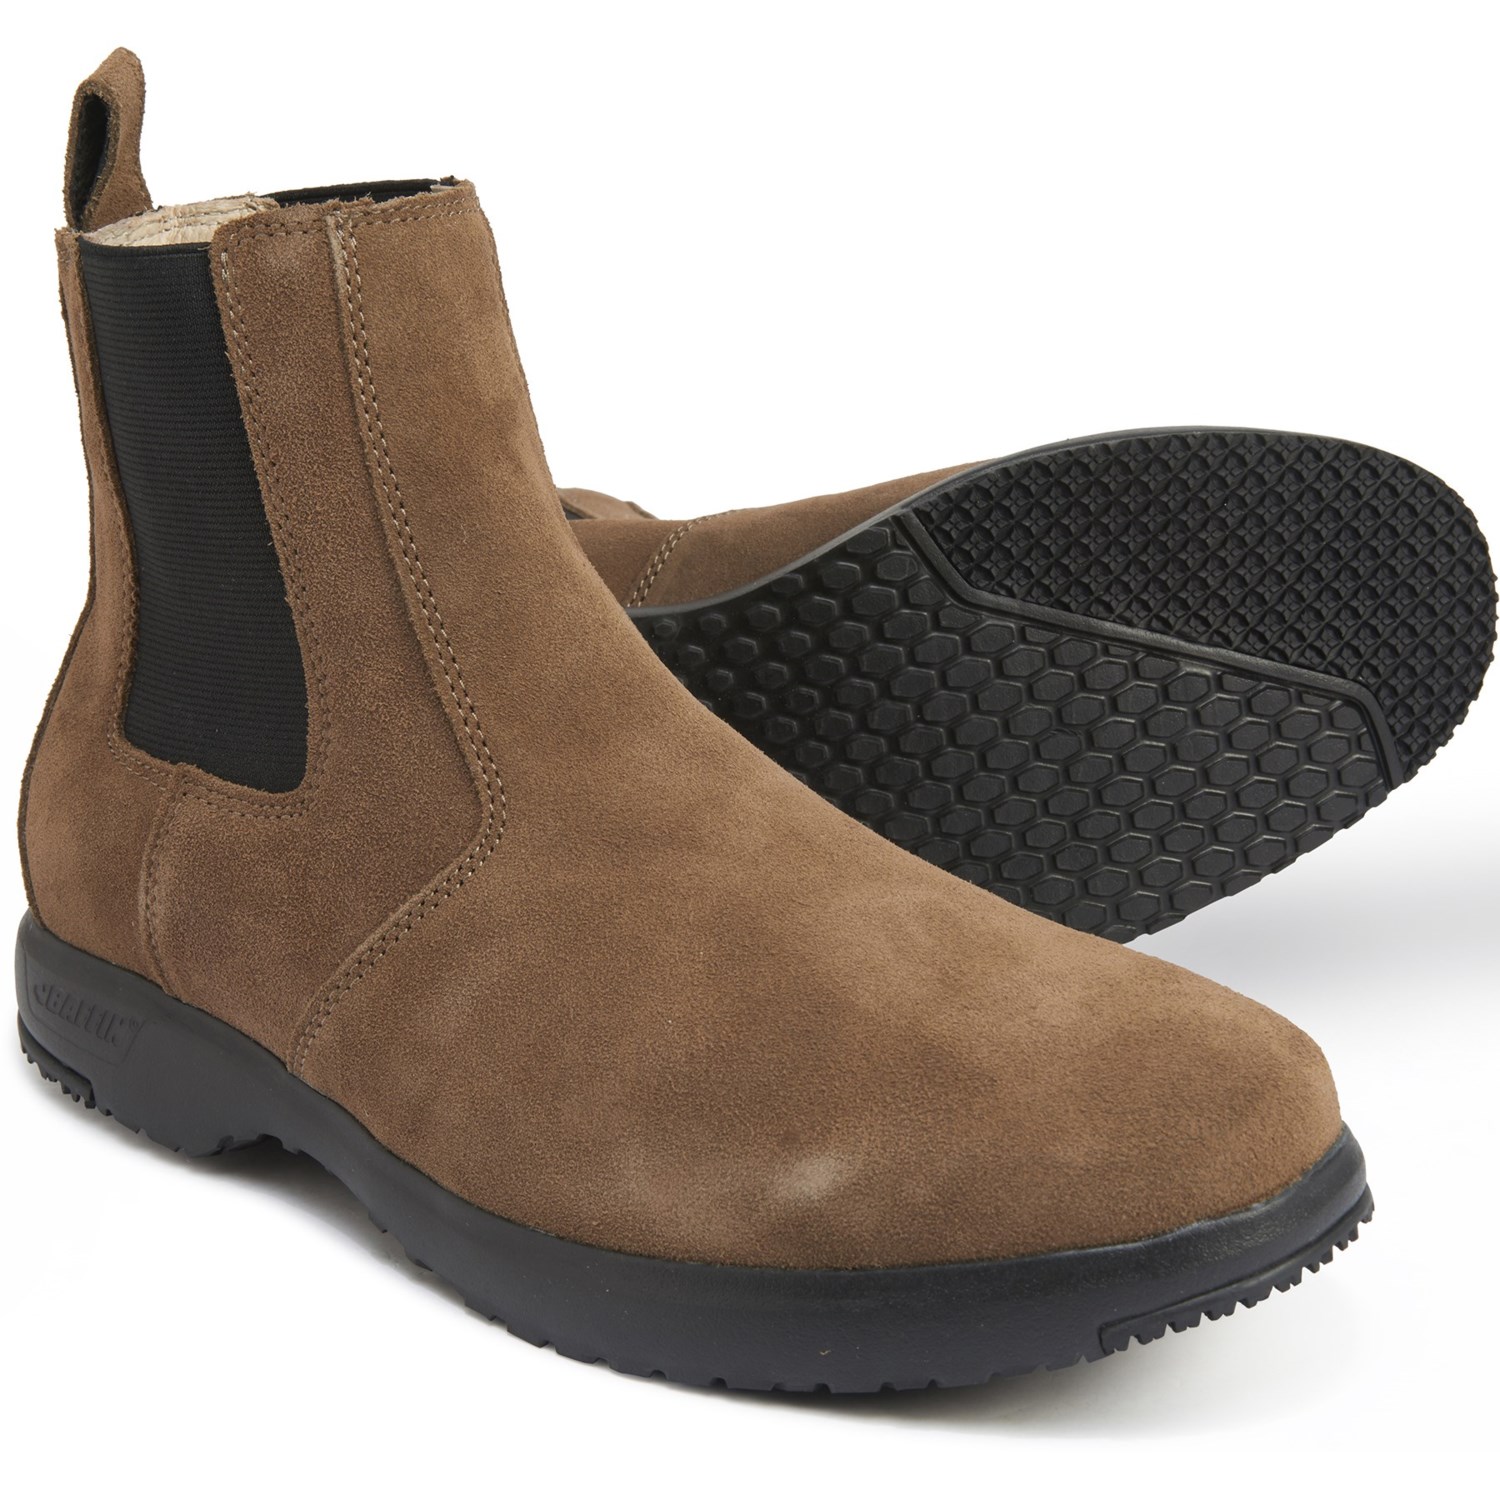 chelsea boots tobacco